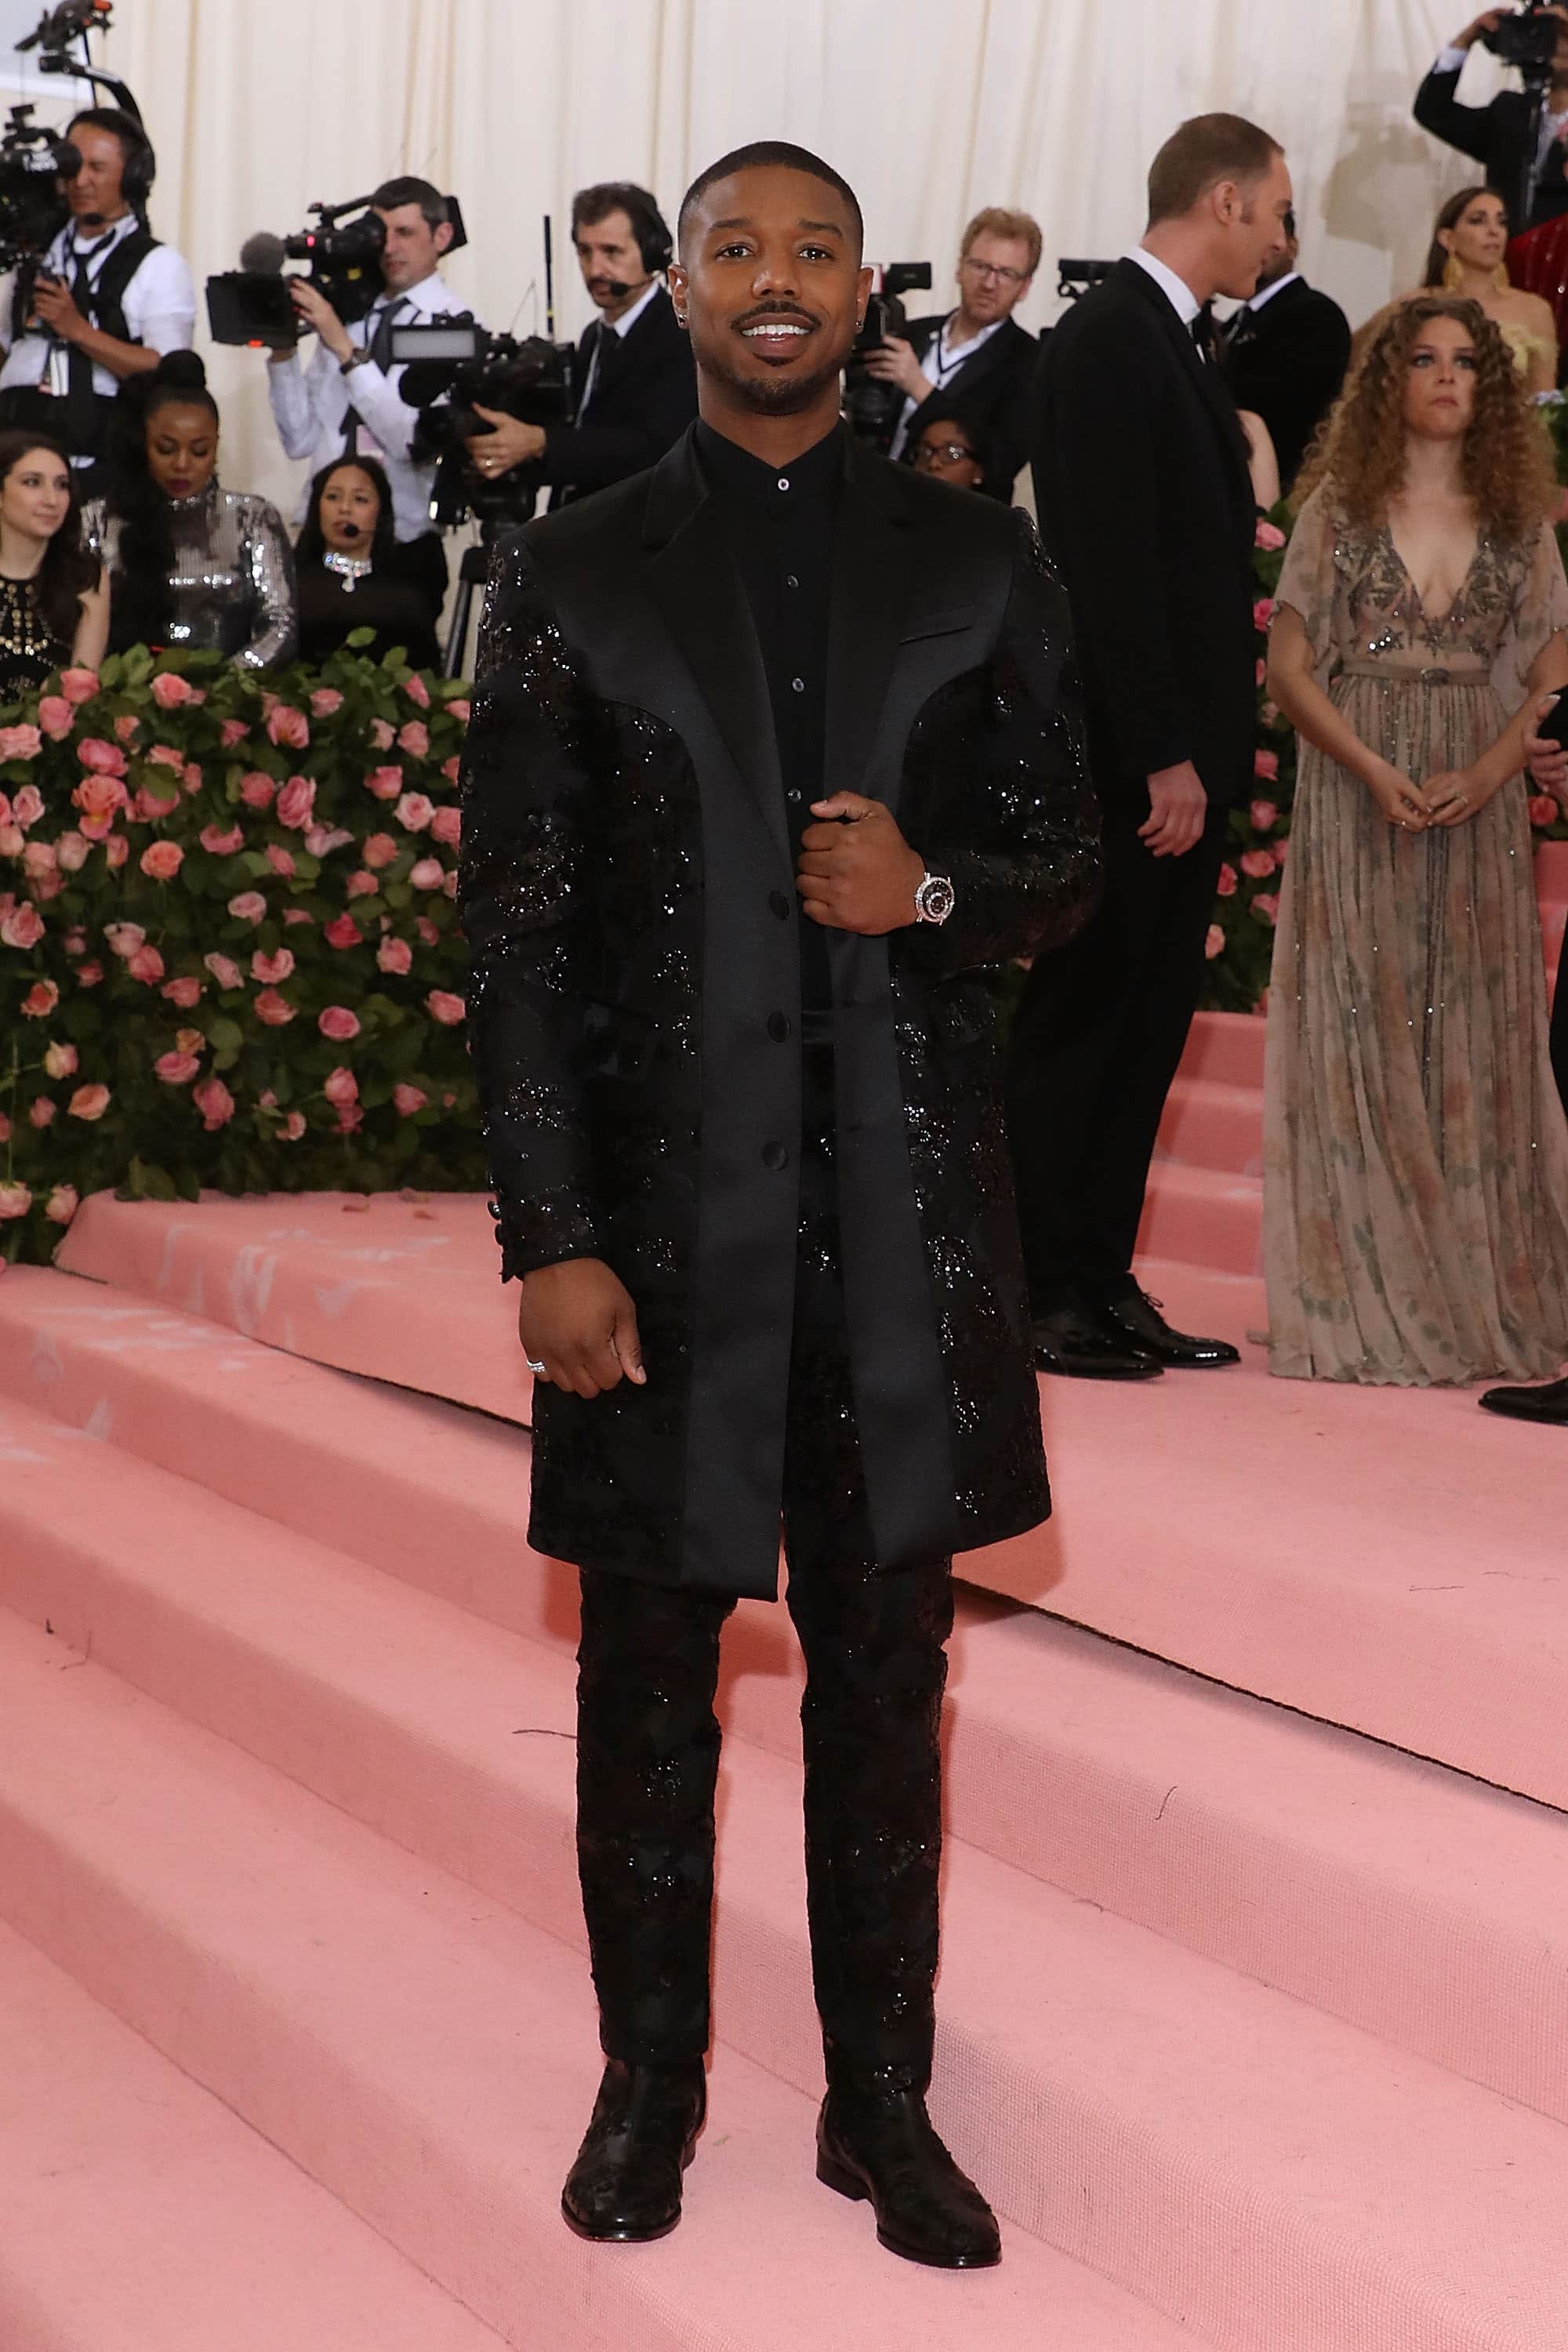 All Of The Crazy and Clever 'Camp' Looks From The 2019 Met Gala